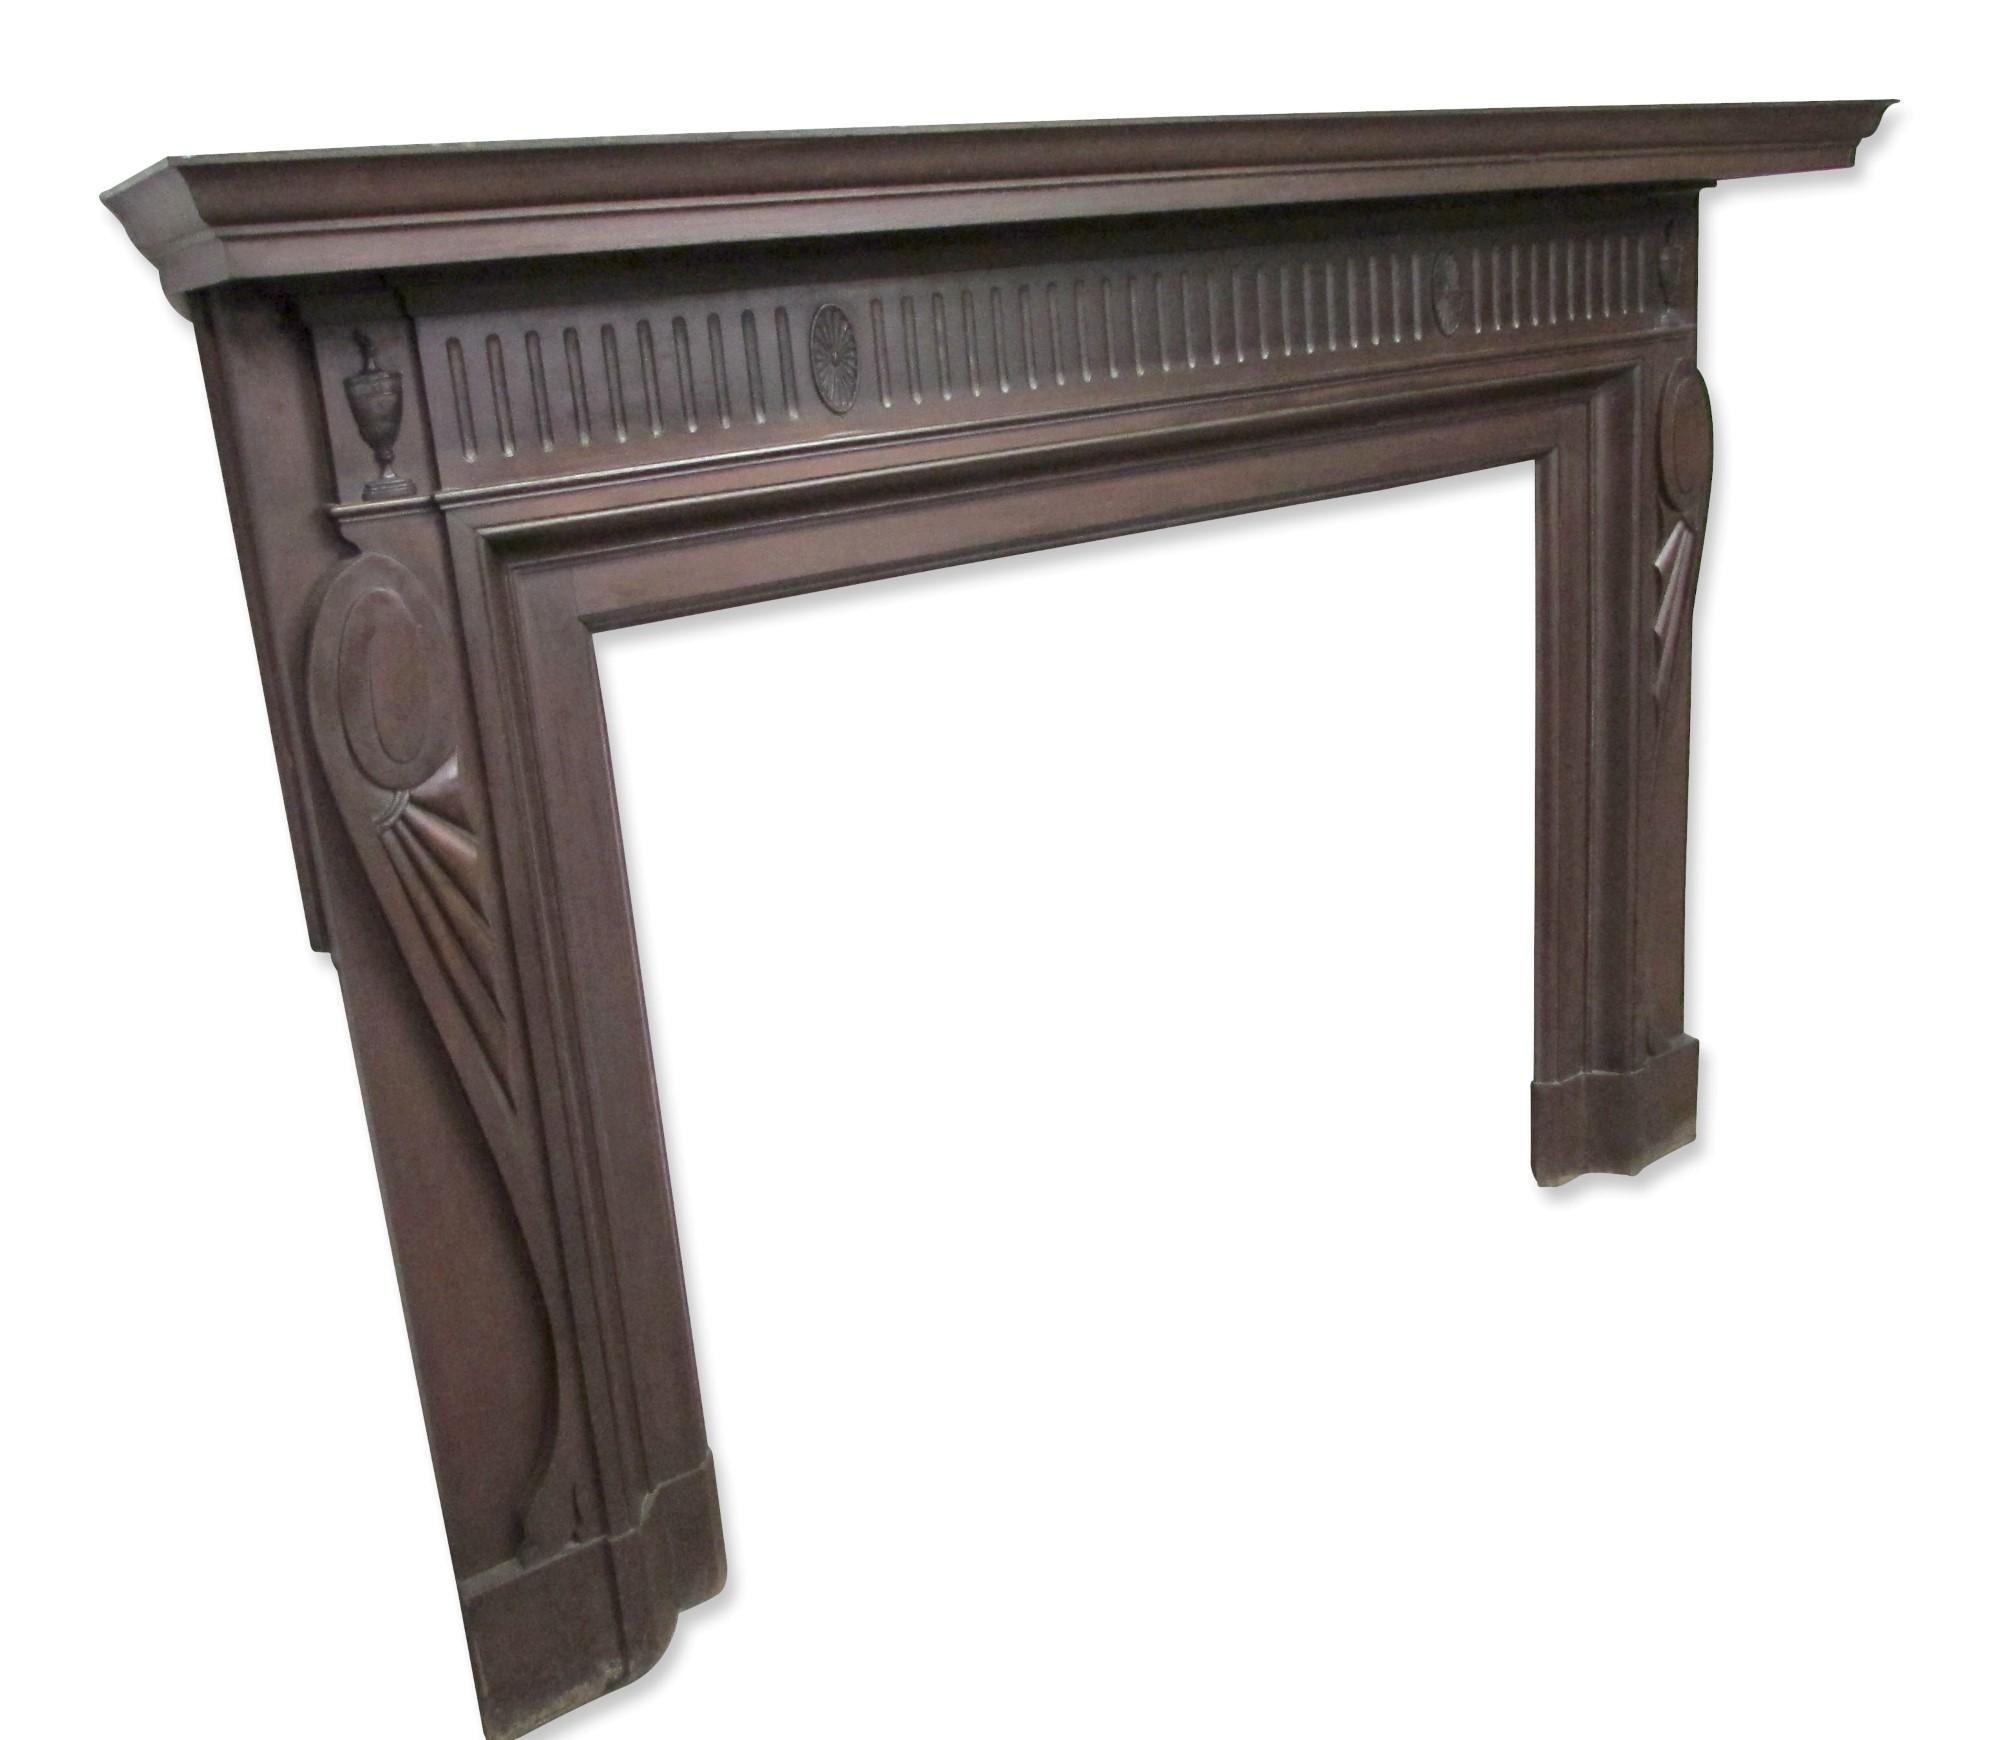 Original turn of the century carved mantel with original finish. The wood appears to be mahogany with carved urns and web details. Swirl and fold detail on sides adds a transitional detail. The mantel is wide with a protruding shelf consistent with